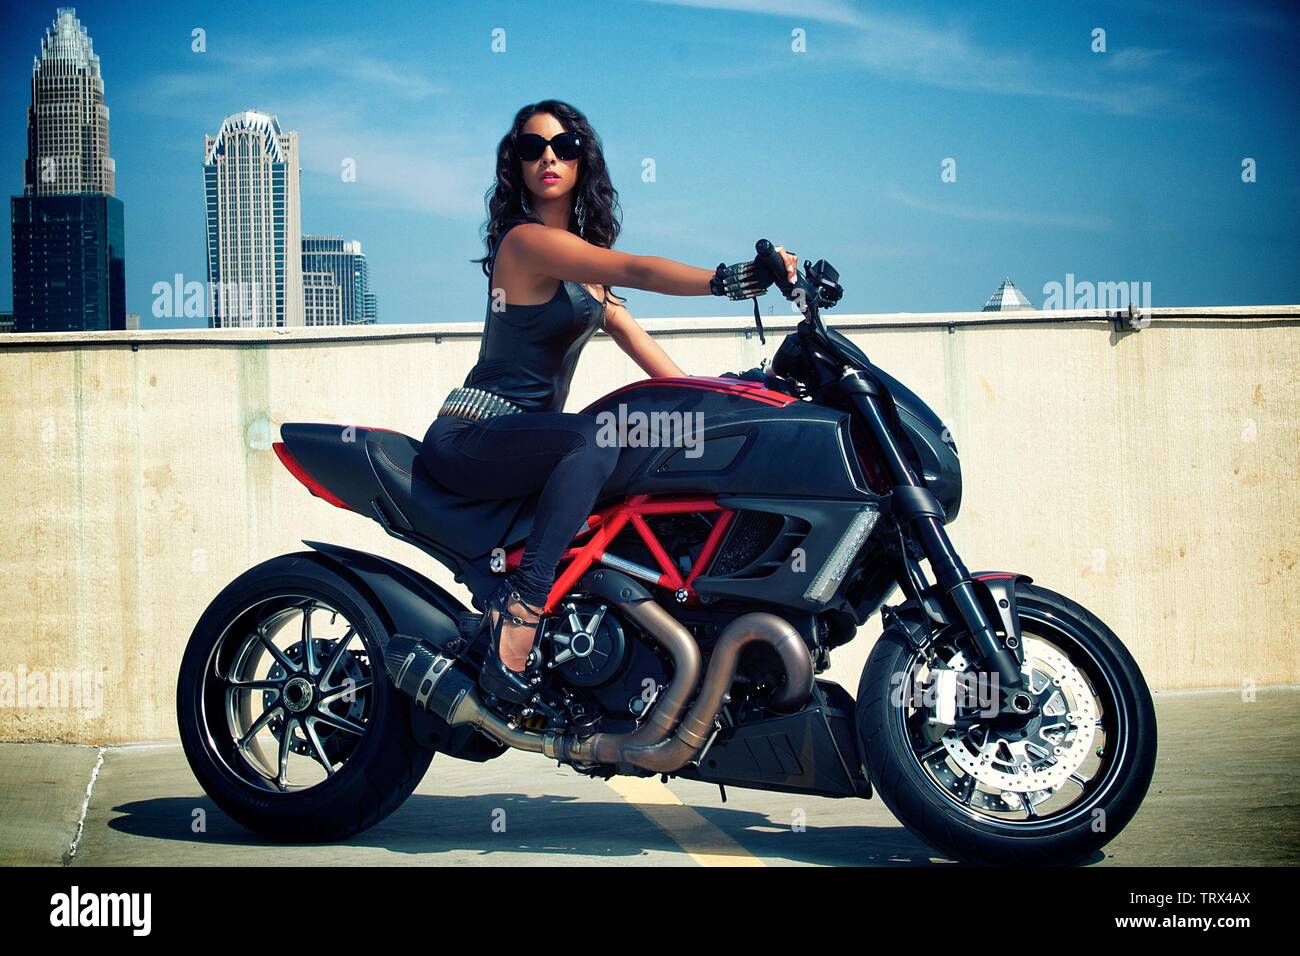 Black Woman on Ducati Motorbike with Skyline in the Background Wearing All Black and Sunglasses Shades Stock Photo